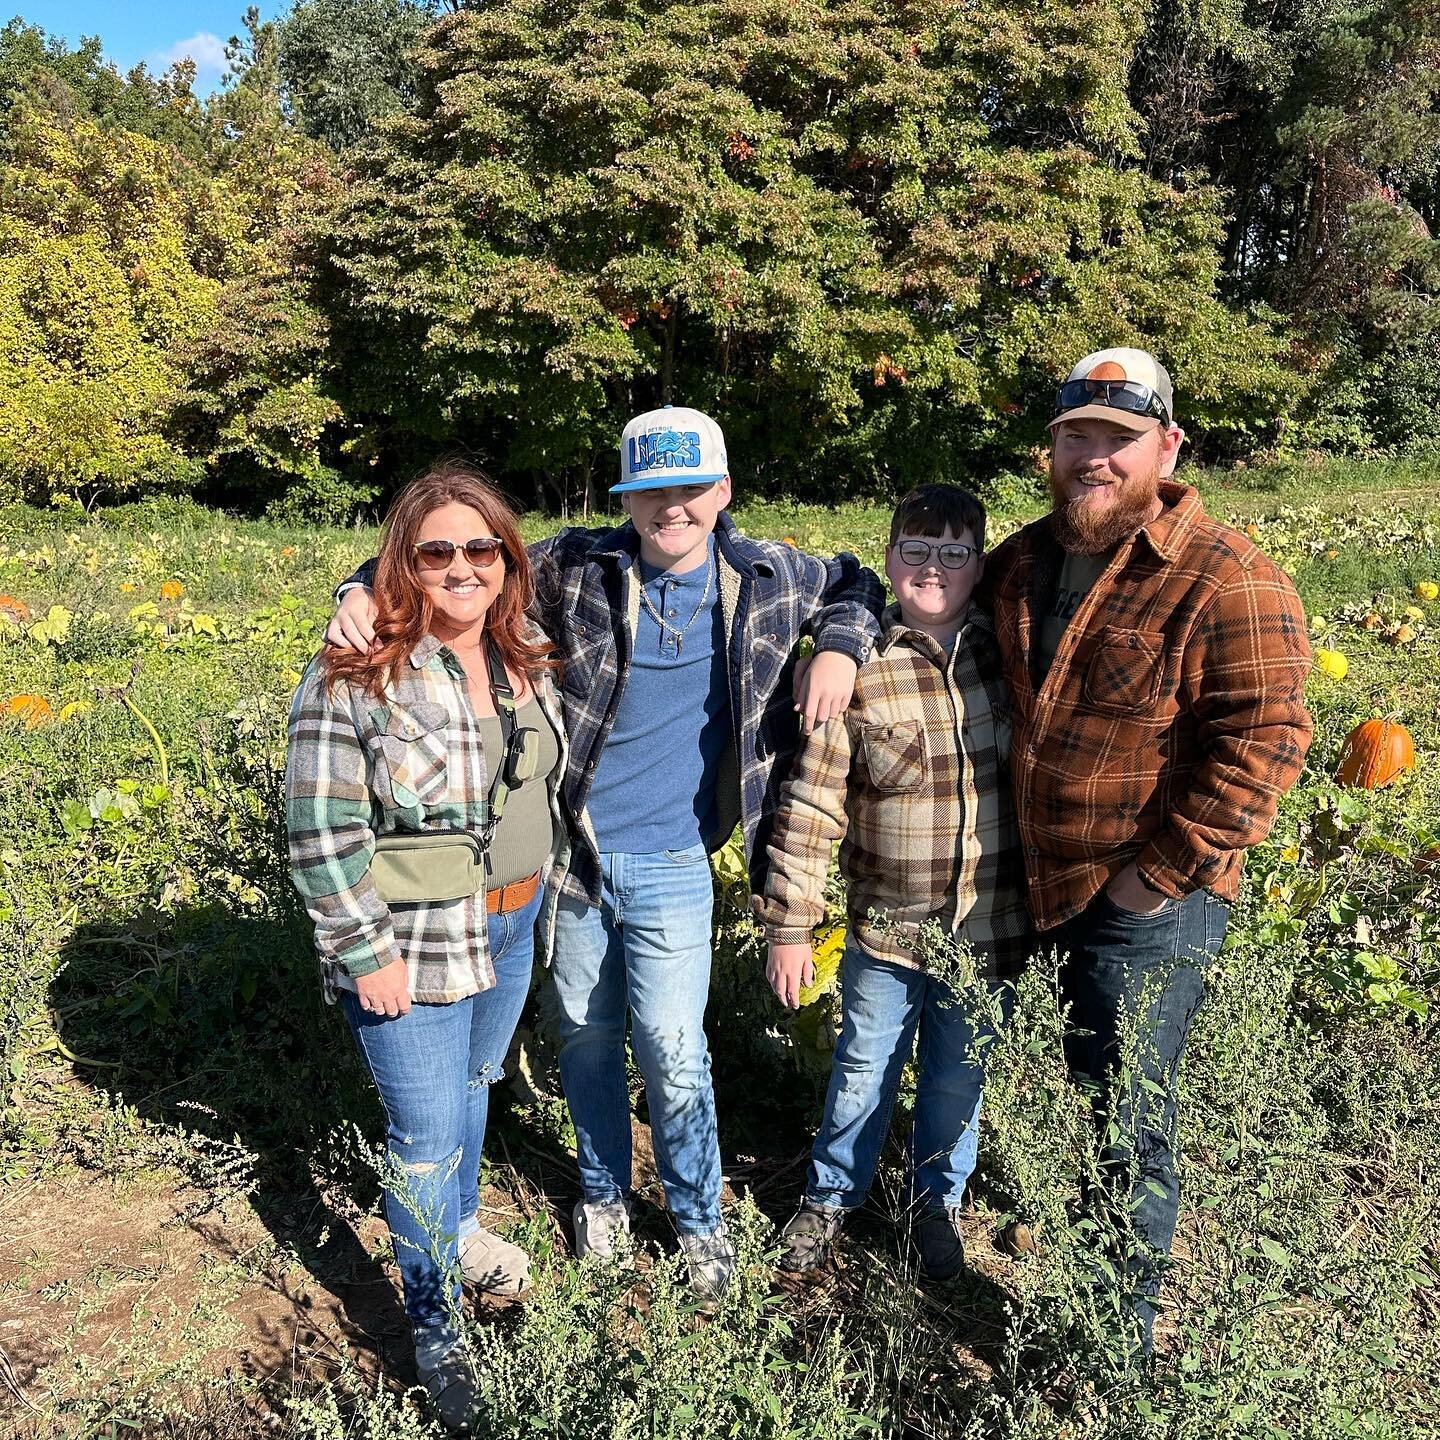 We had a great fall fun day today sippin&rsquo; hot cider and pumpkin pickin&rsquo;! Swipe for the bloopers of me trying to get the boys to take a real photo 😂 Ahhh tis the boy mom life! #unclejohnscidermill #fallinmichigan #pumpkinpatchphotoshoot #